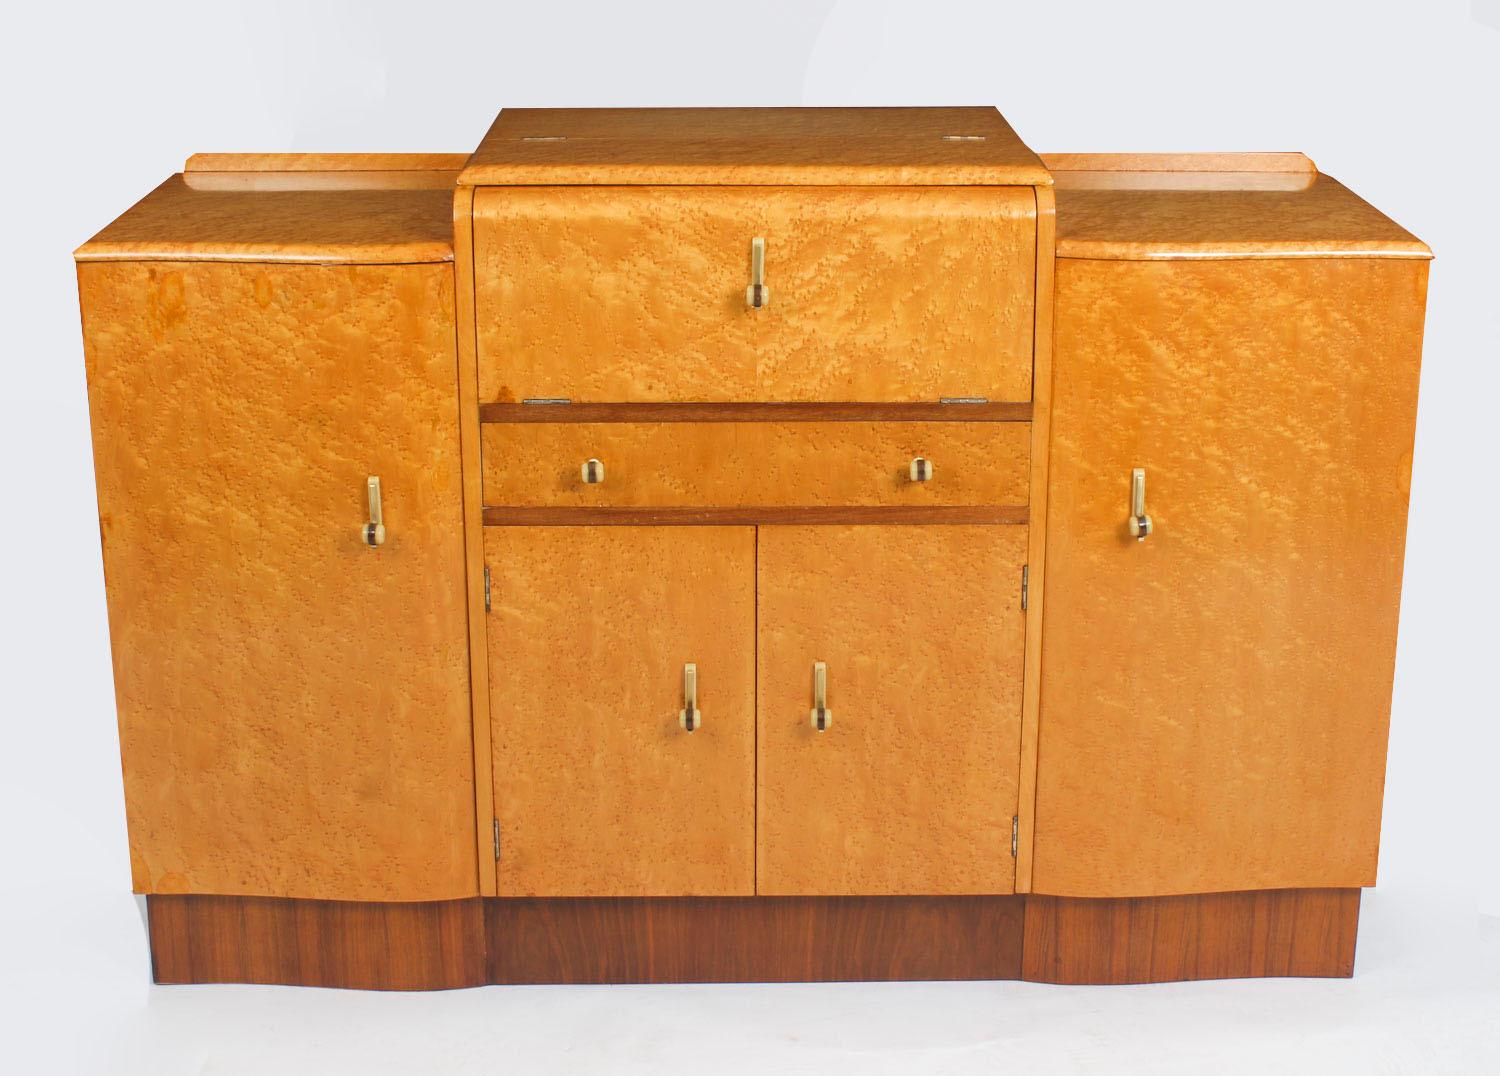 This is a fabulous antique Art Deco period bird’s eye maple cocktail cabinet, circa 1930 in date.

The cocktail cabinet has serpentine shaped ends and features a concertina cocktail section with mirrored interior above a drawer which is fitted out